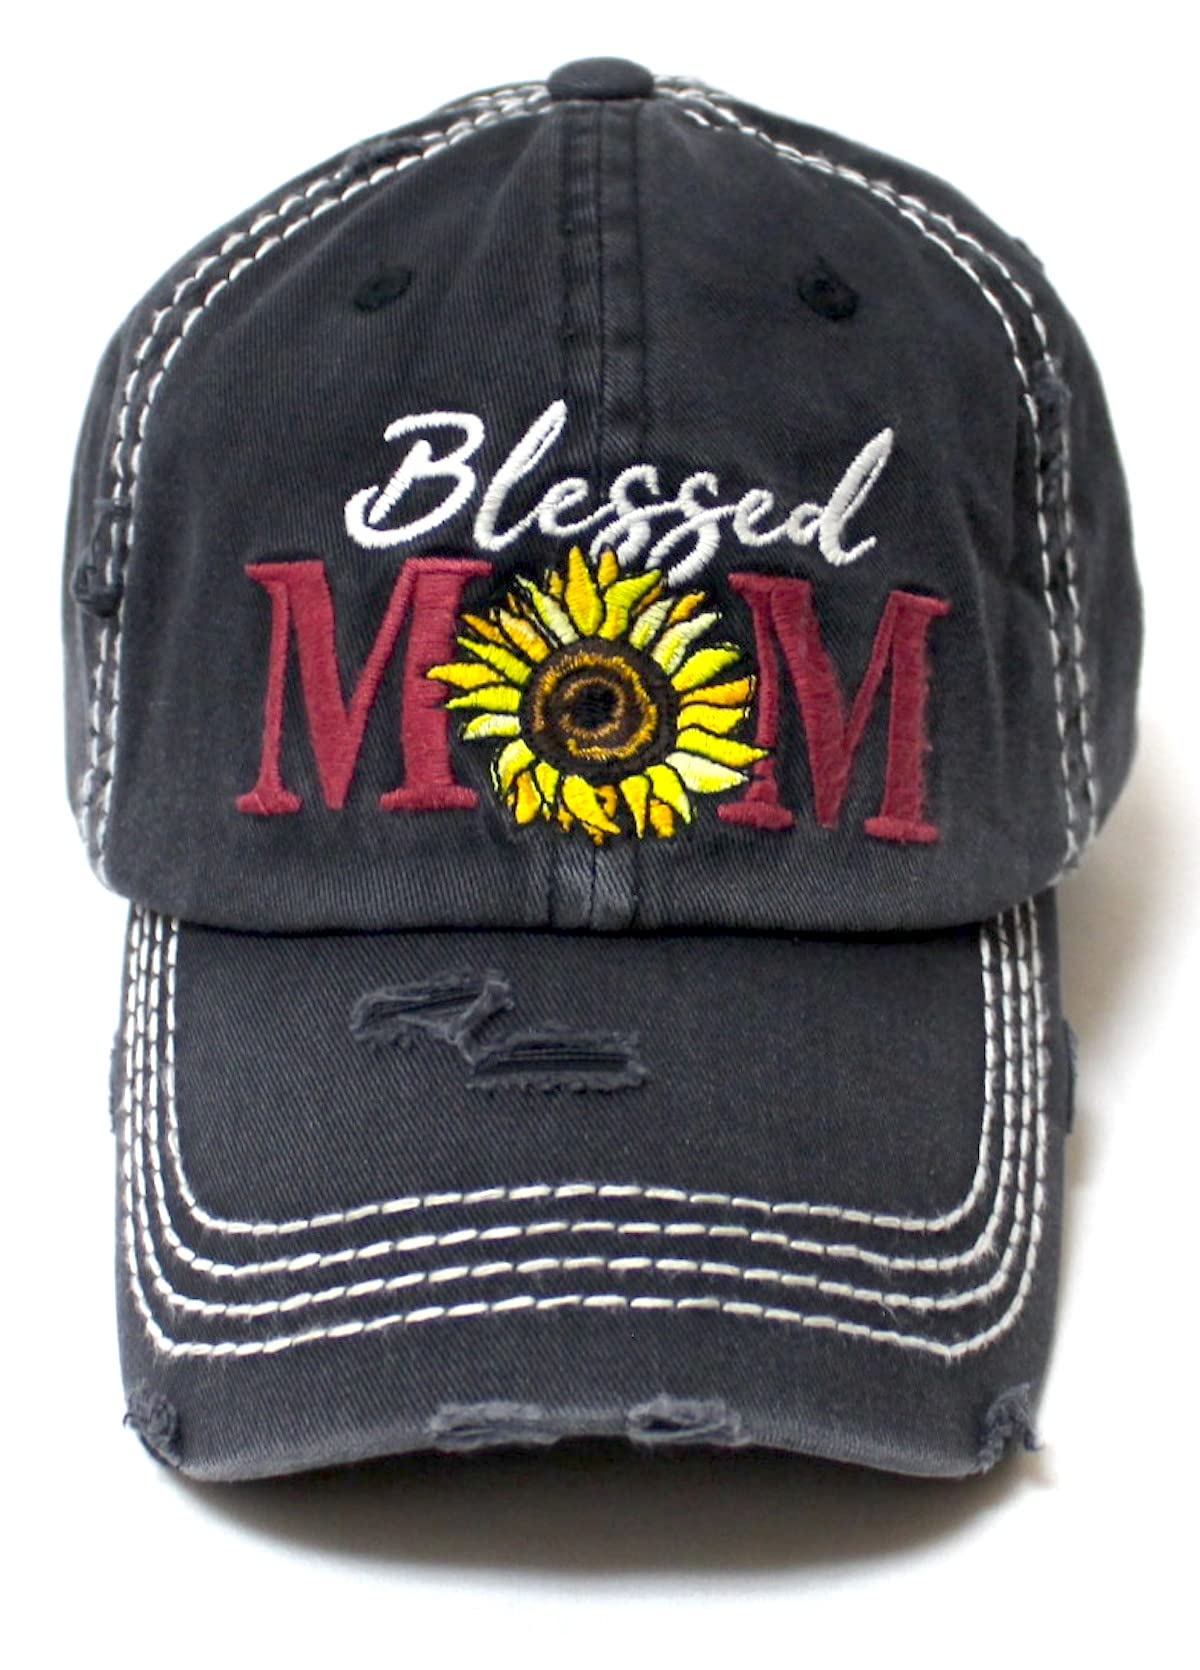 CAPS 'N VINTAGE Womens Embroidery Cap Blessed MOM Sunflower Monogram Distressed Hat